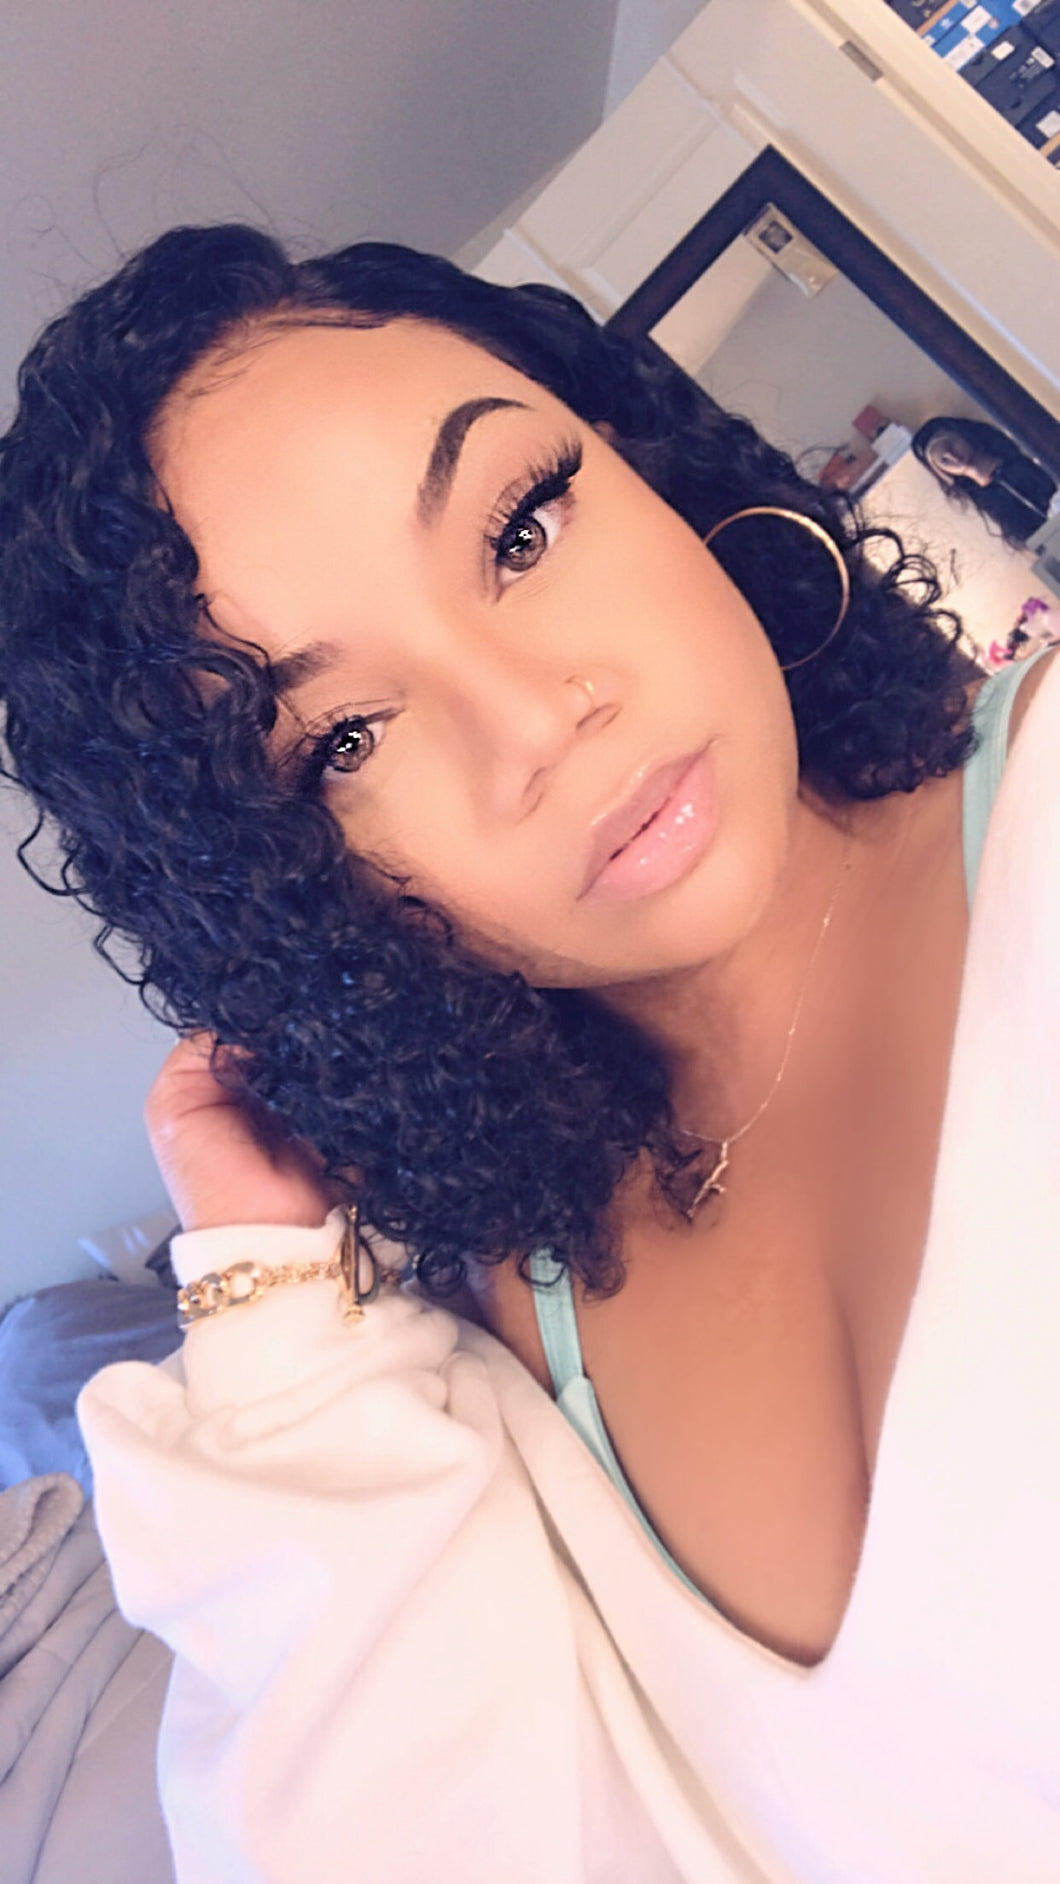 Deep Curly Bob - LACE FRONT WIG